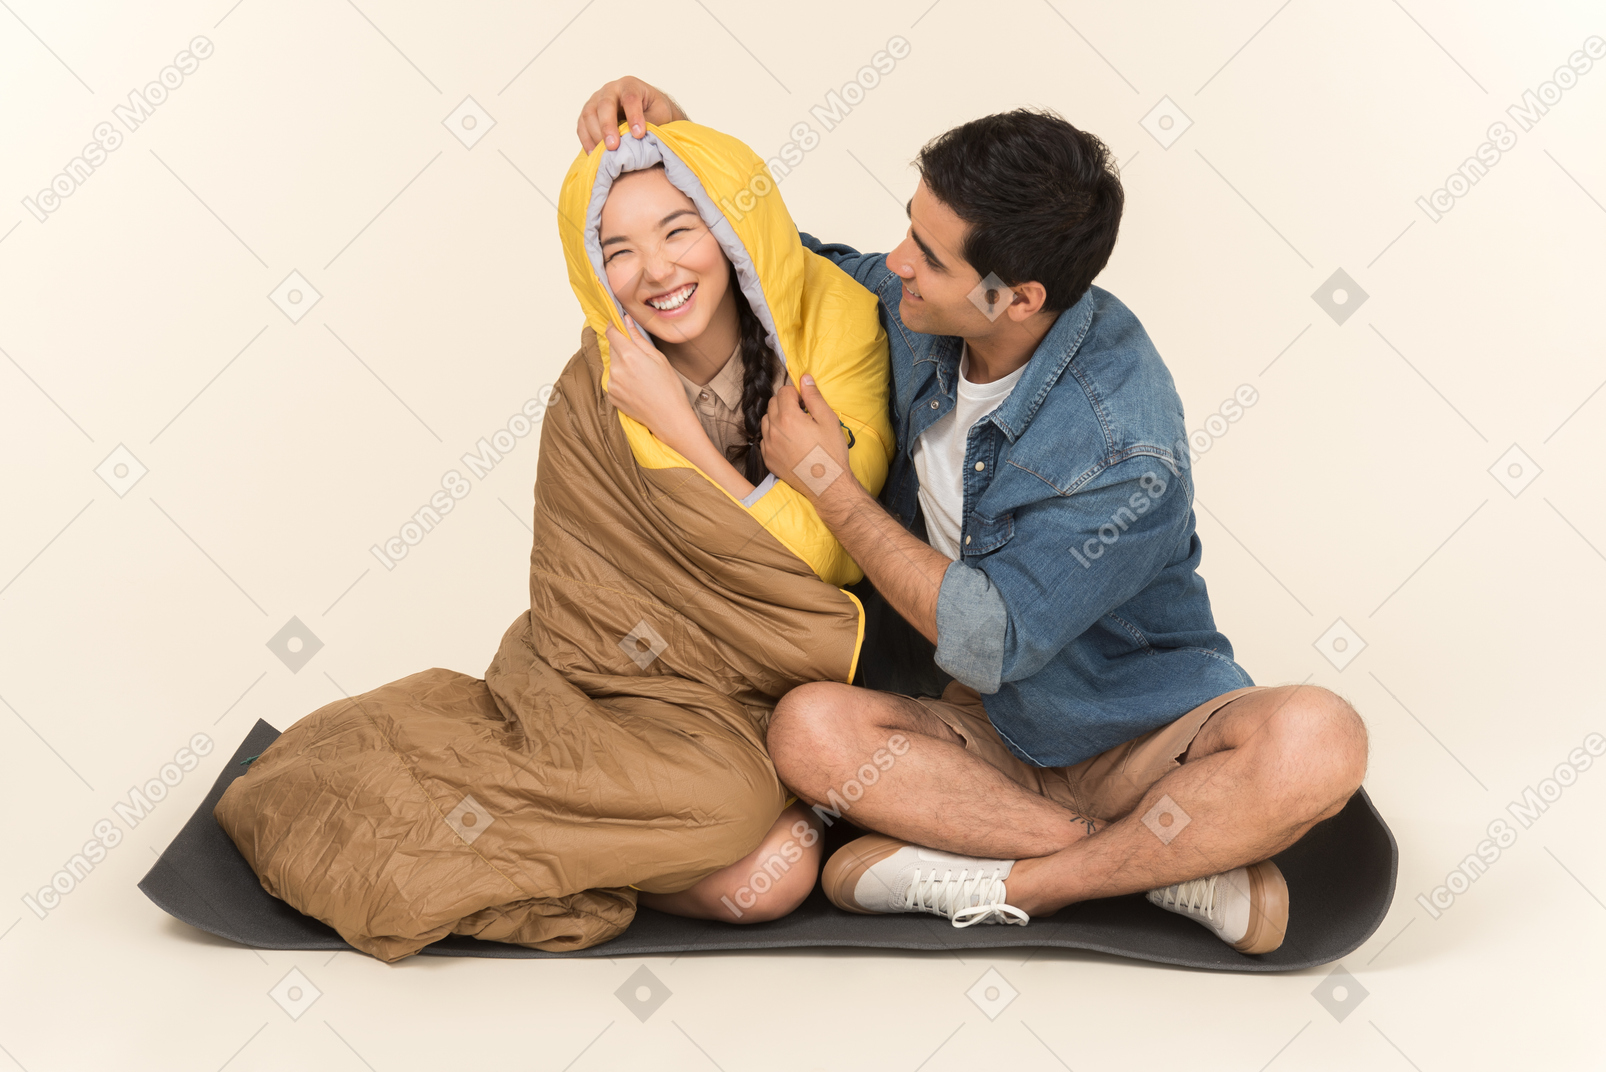 Young interracial couple sitting in sleeping bags and fooling around